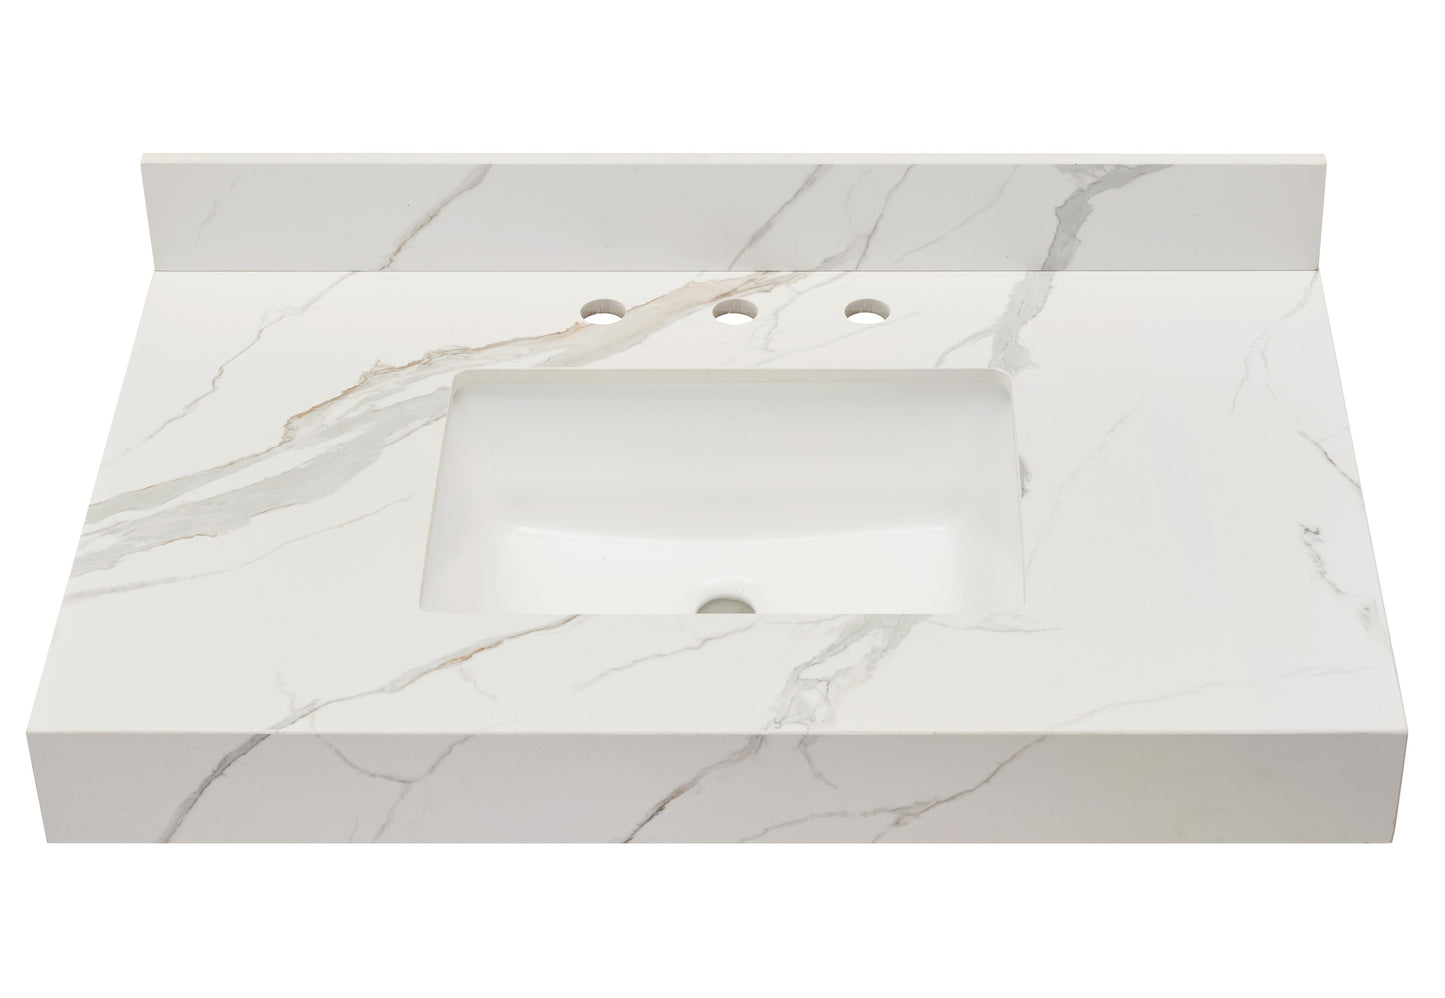 Stone effects Vanity Top in Calacatta White Apron with White Sink